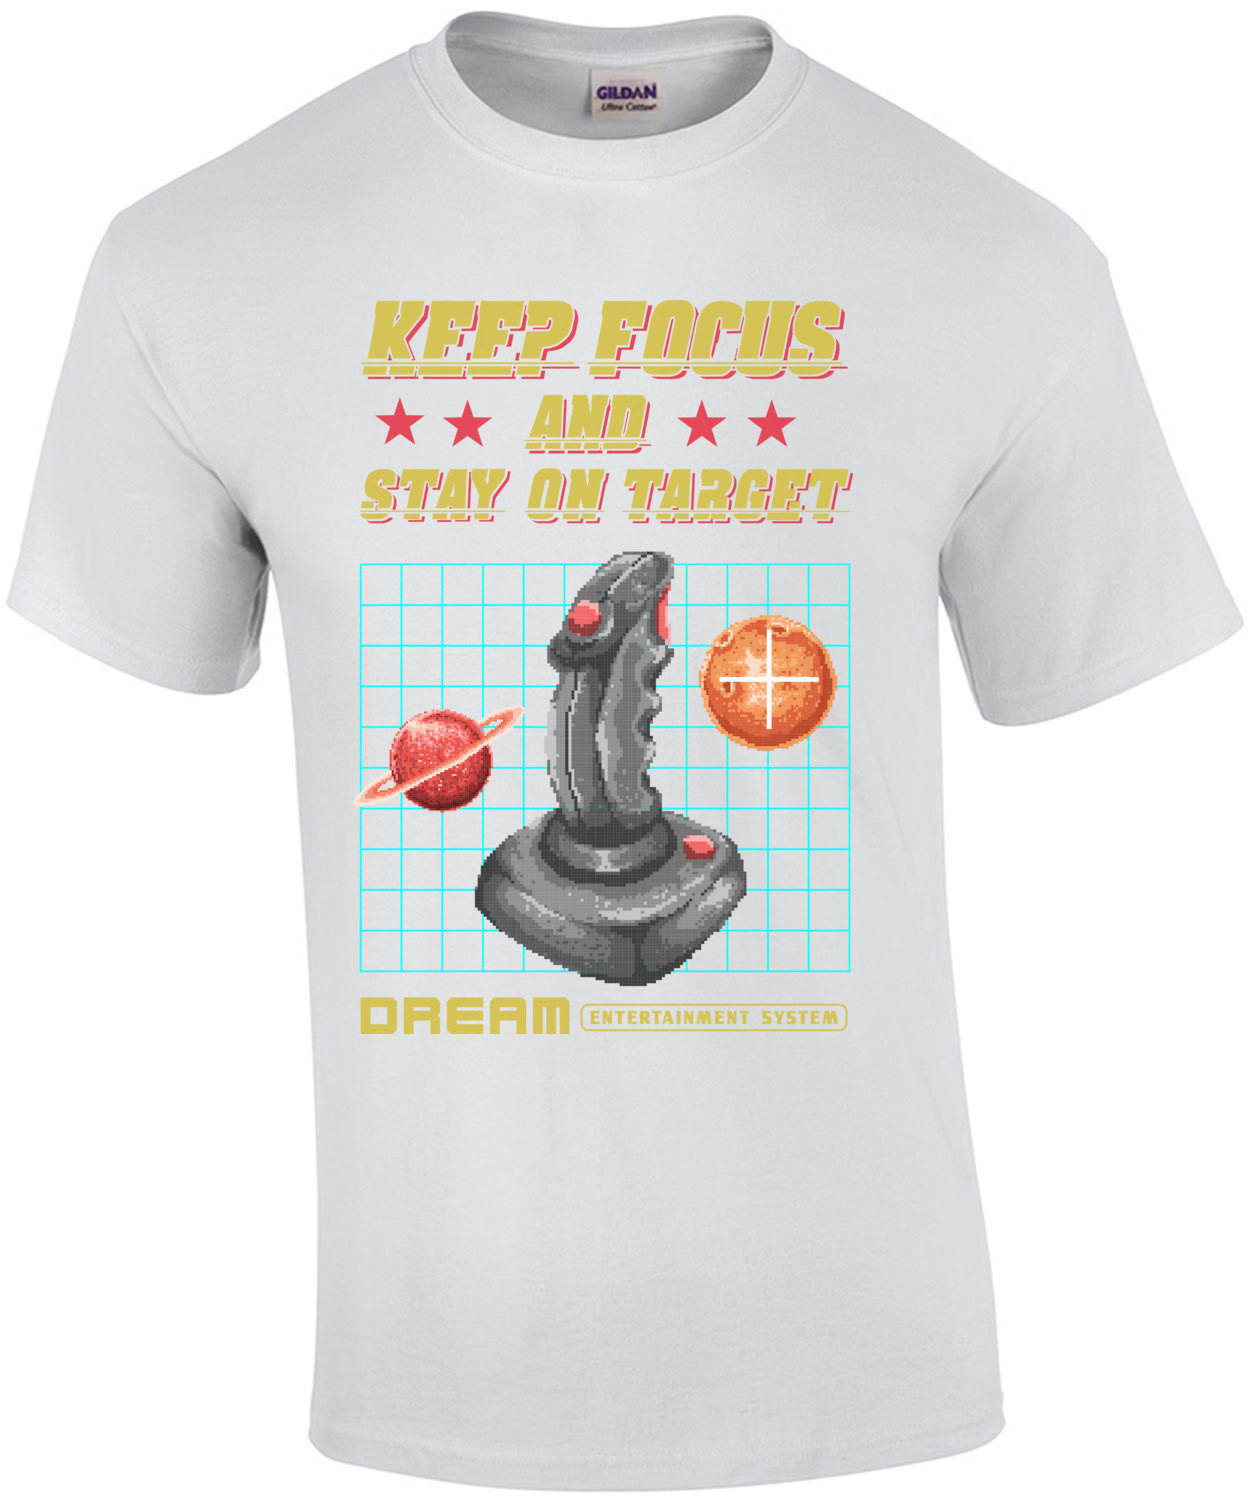 Keep Focus And Stay On Target Retro Gaming T-Shirt